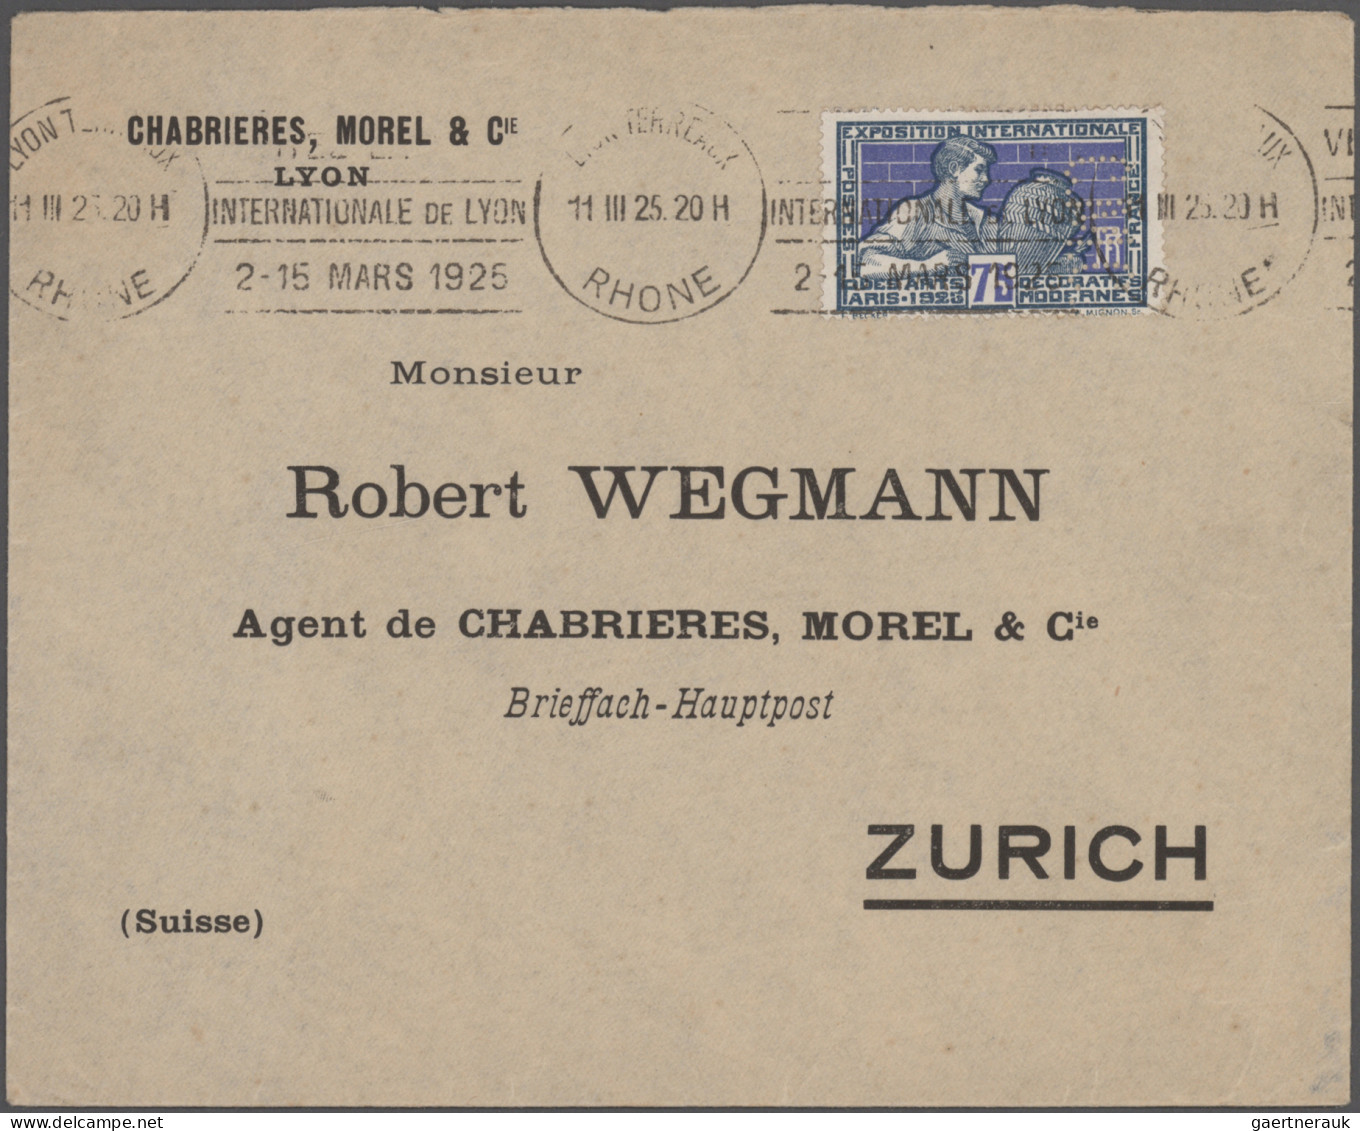 Europe: 1890/2000 (ca.), balance of apprx. 350 covers/cards with commercial and